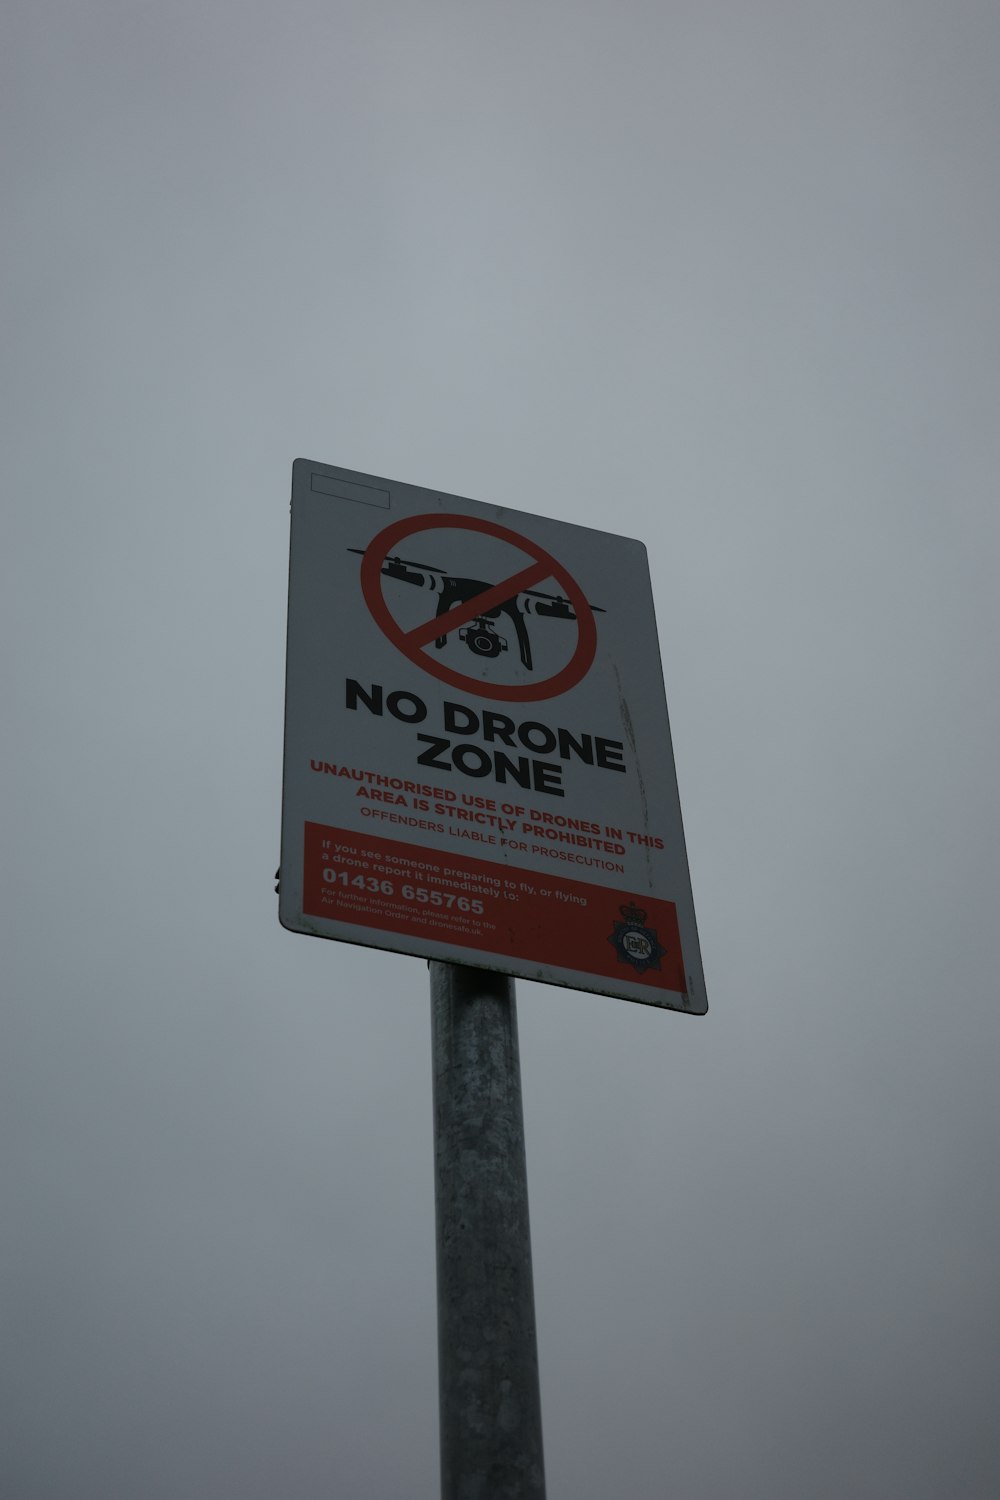 a no drone zone sign on a pole